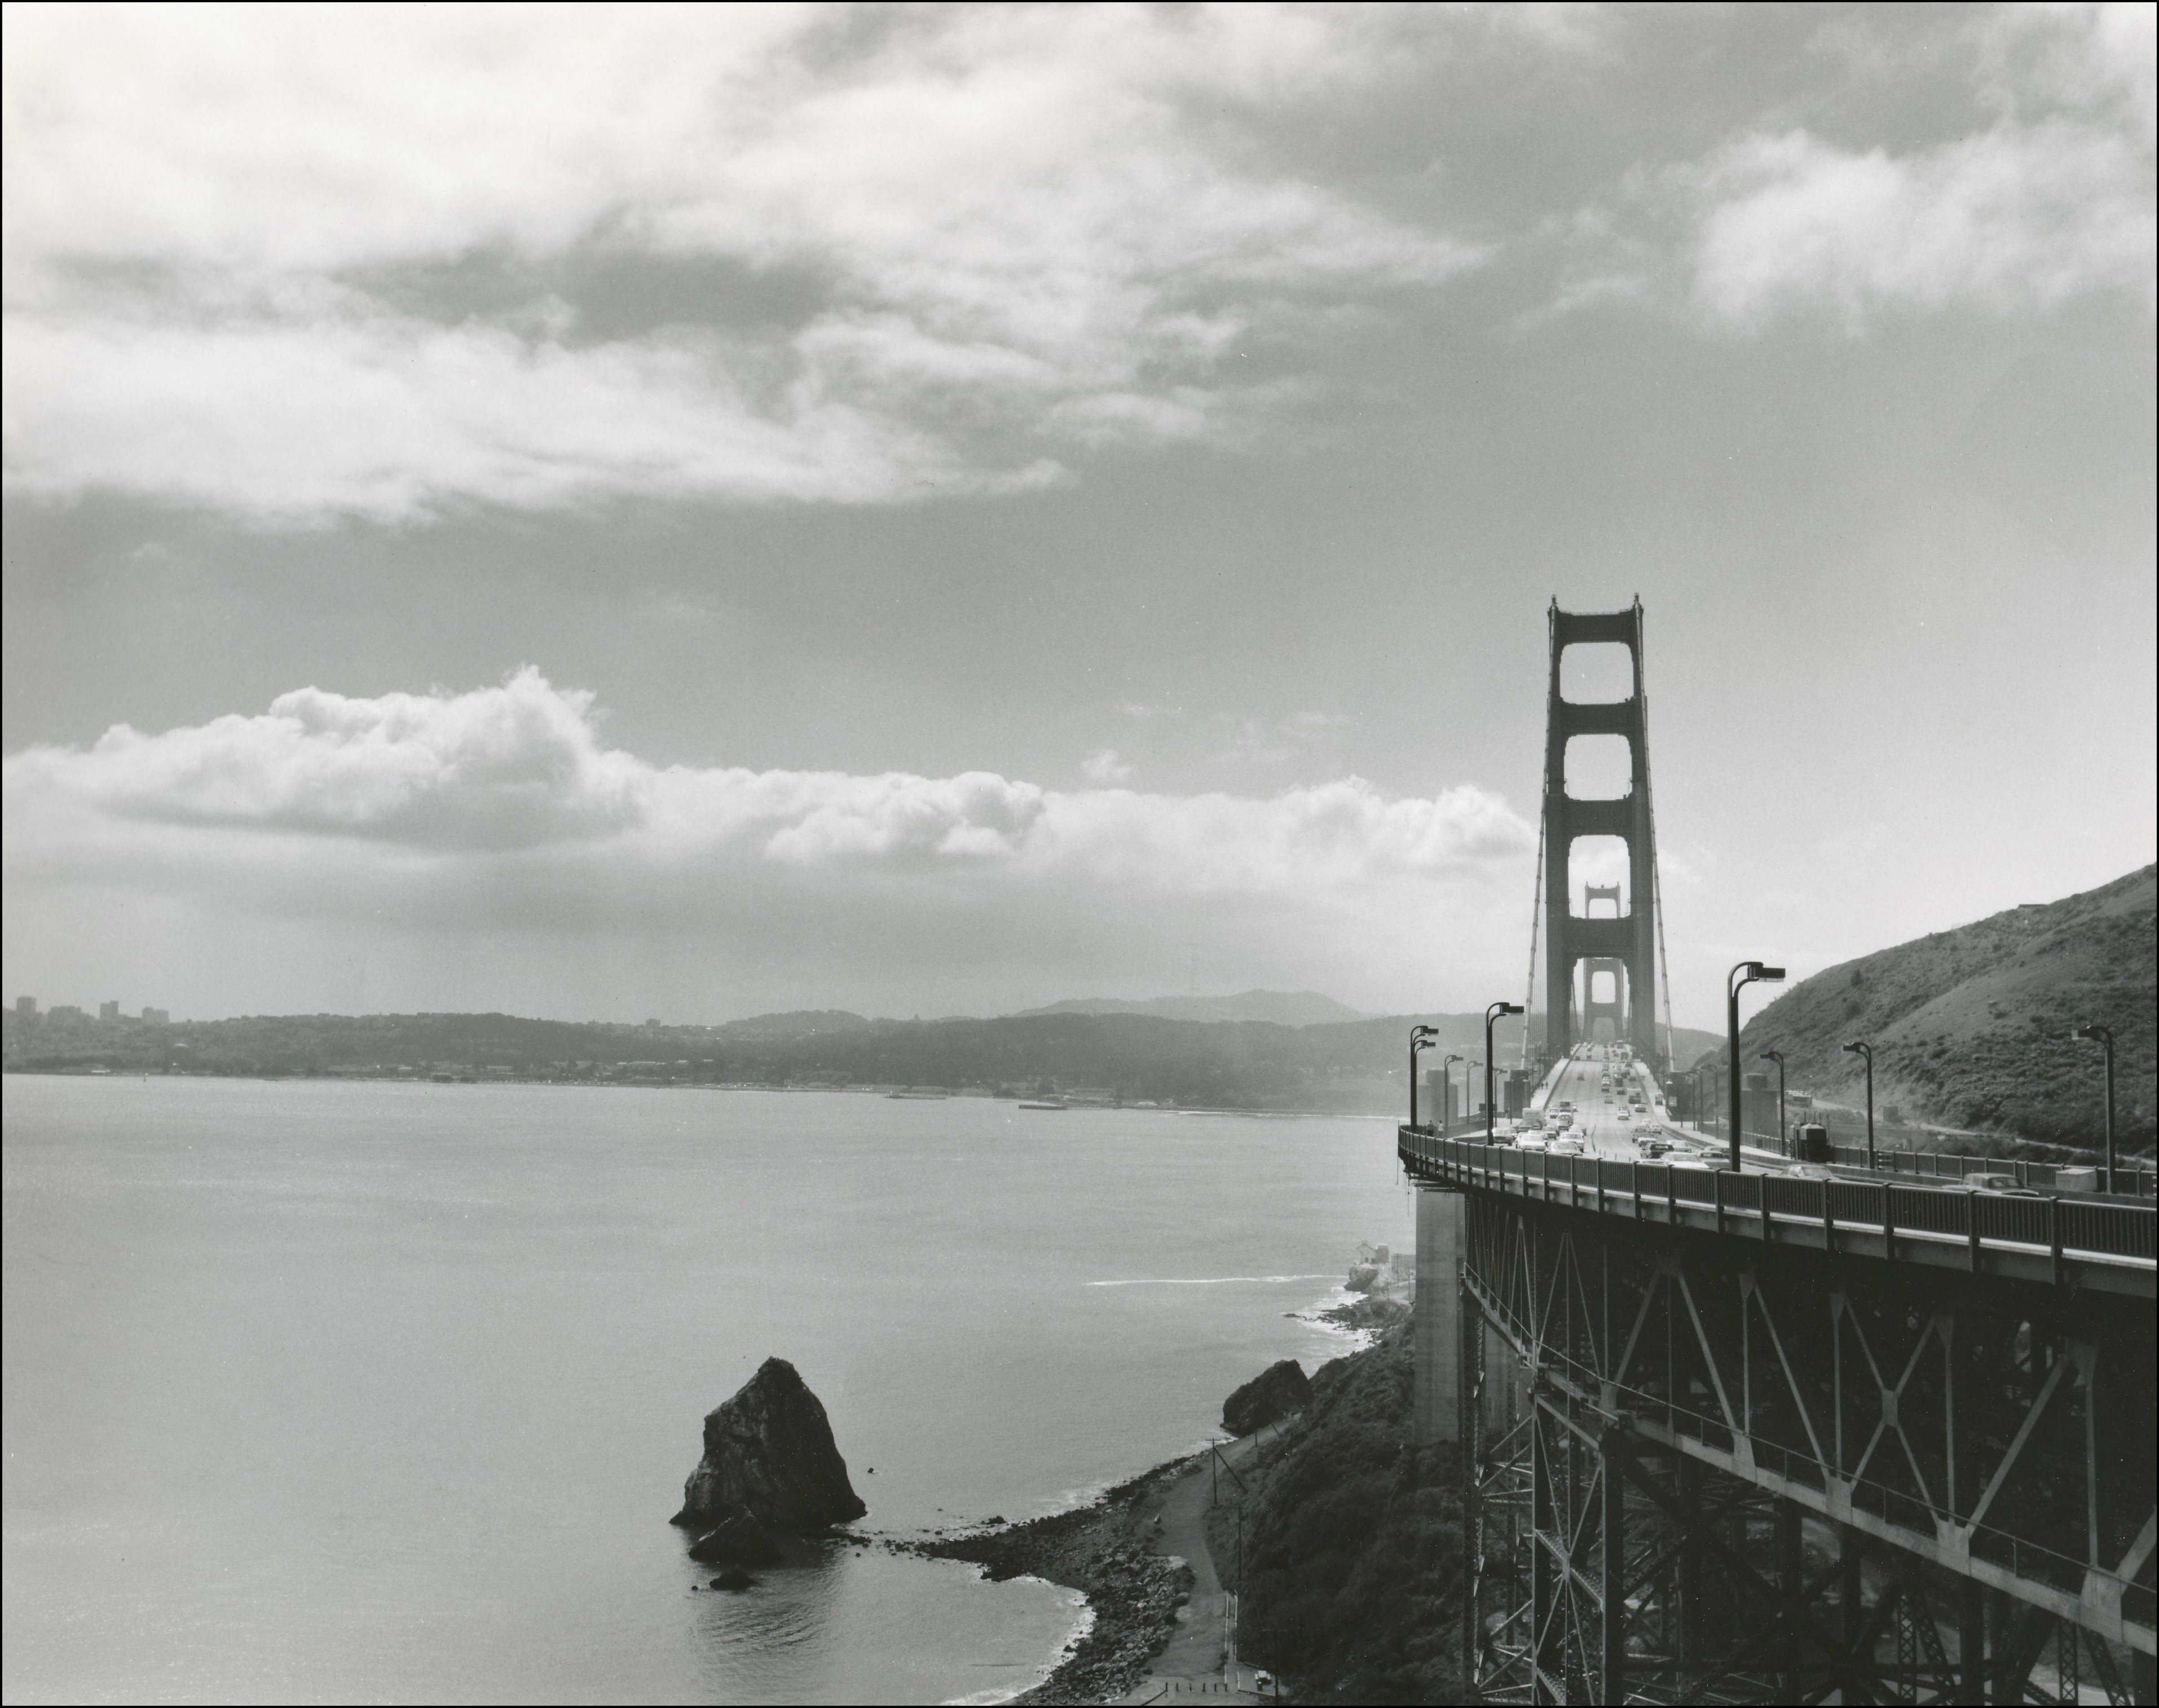 view of the Golden Gate bridge on the right side and San Francisco Bay